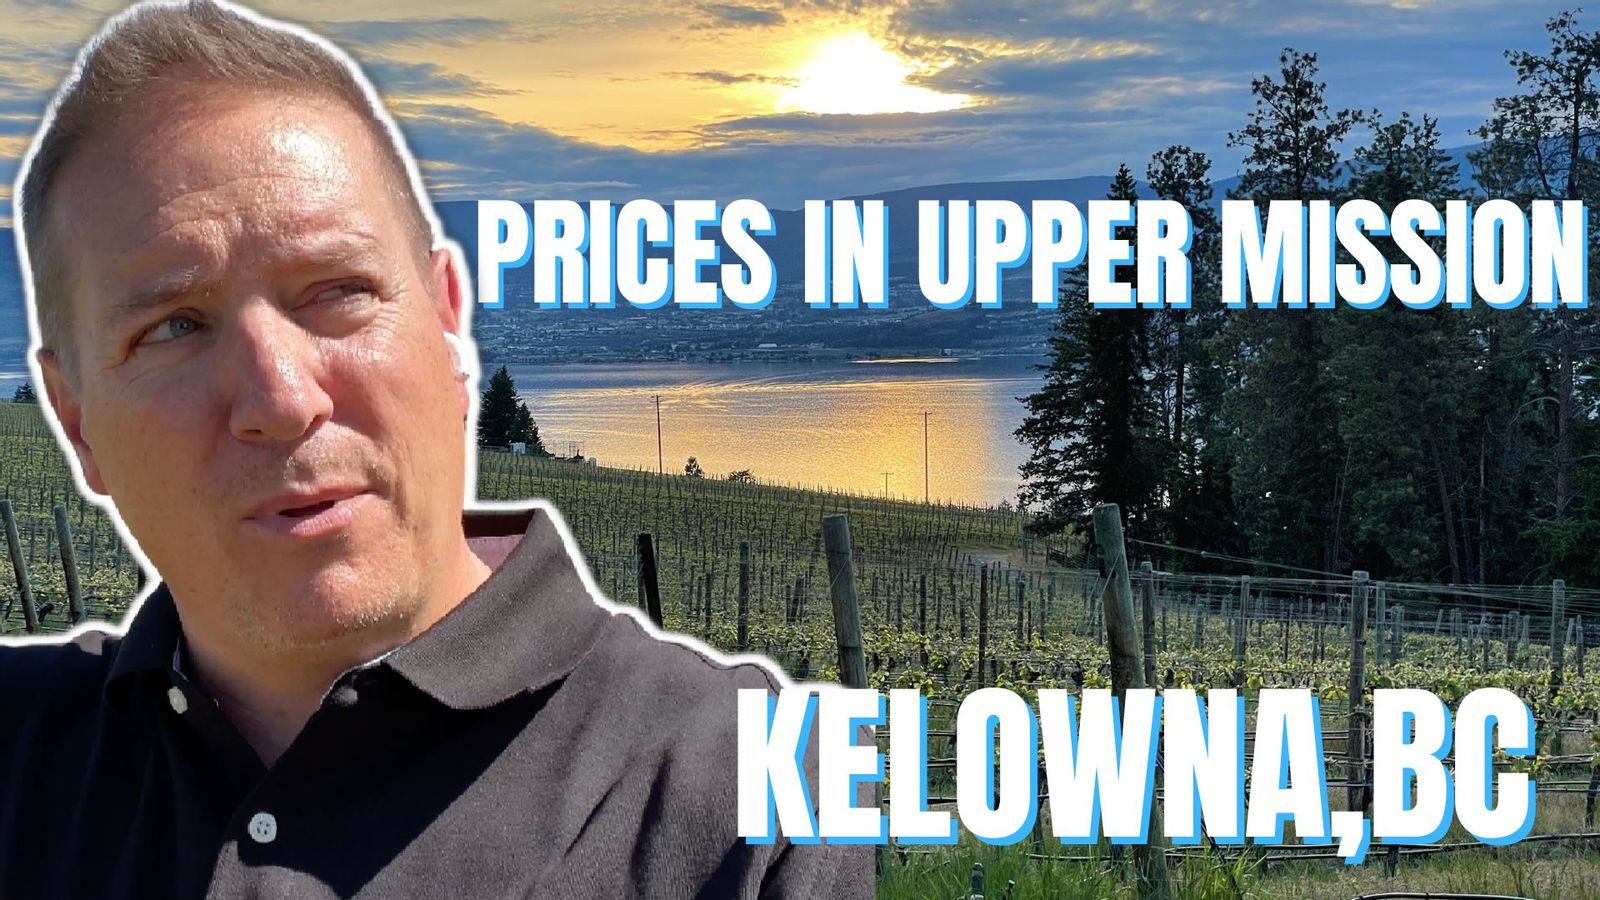 Living in Kelowna British Columbia: What are Prices Like in Upper Mission